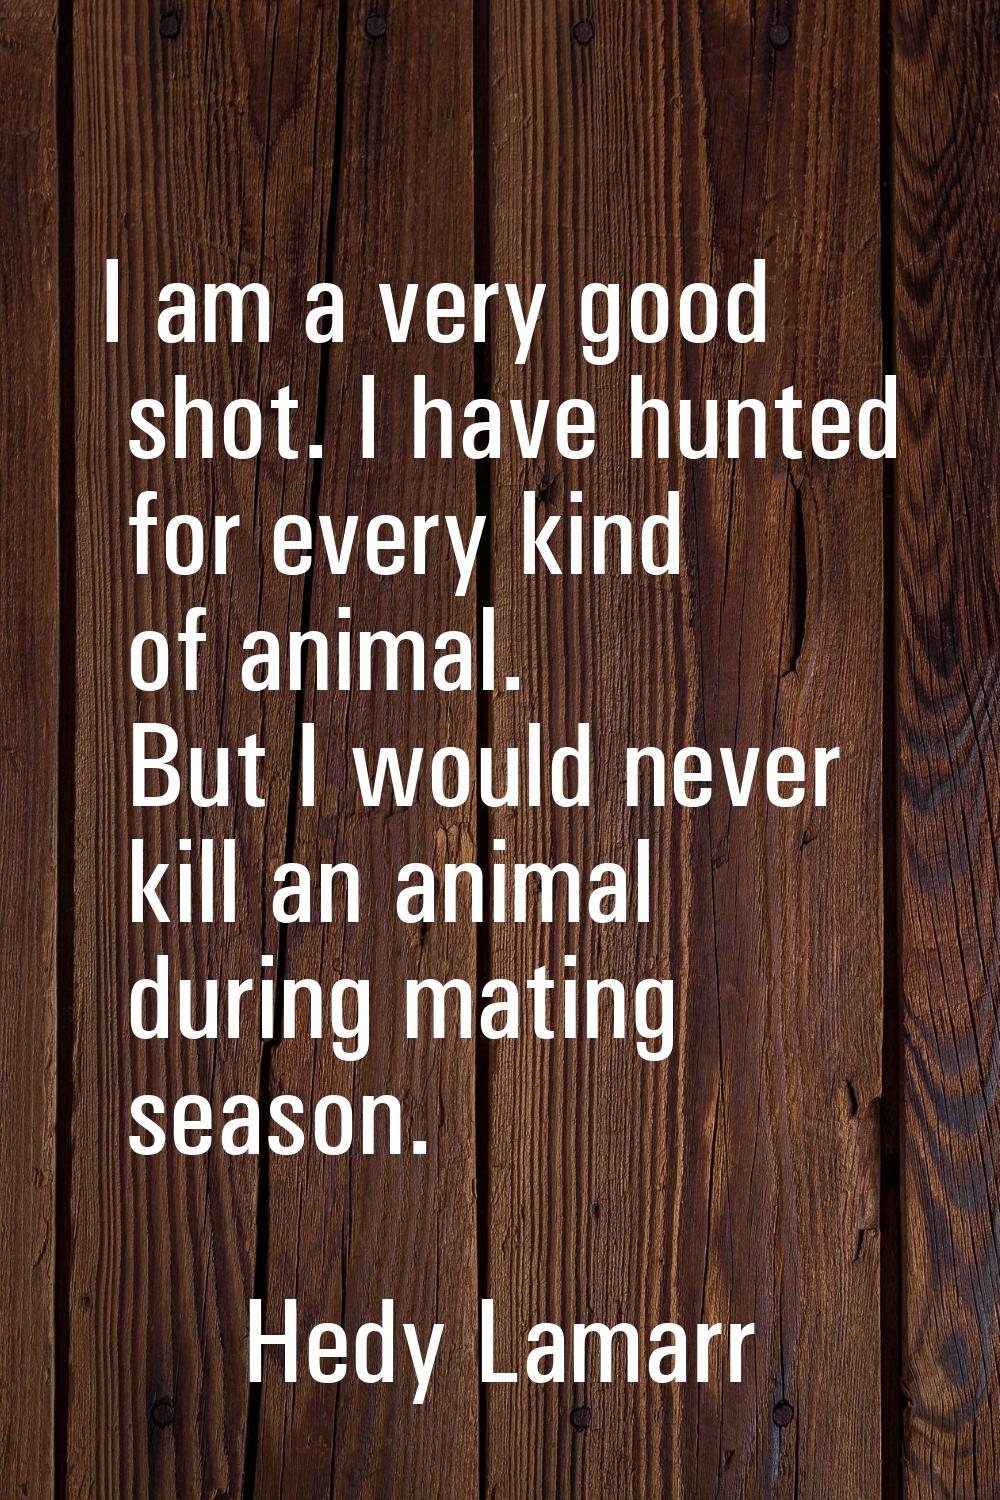 I am a very good shot. I have hunted for every kind of animal. But I would never kill an animal dur